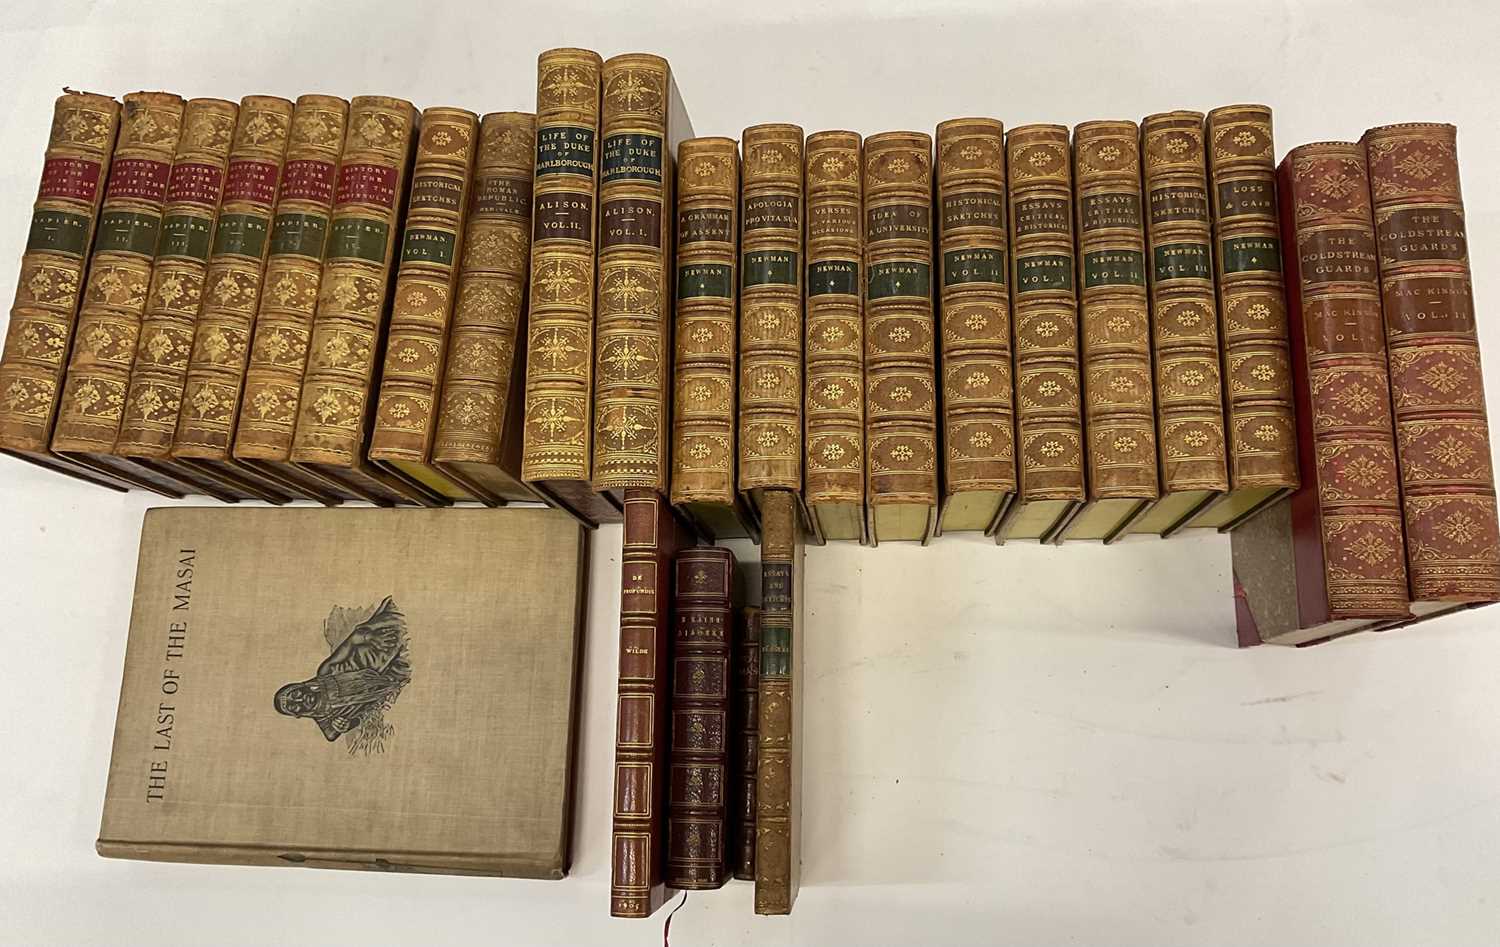 Decorative bindings including Napier - History of the Peninsular Wars, 6 Vols. 1876, also Archibald